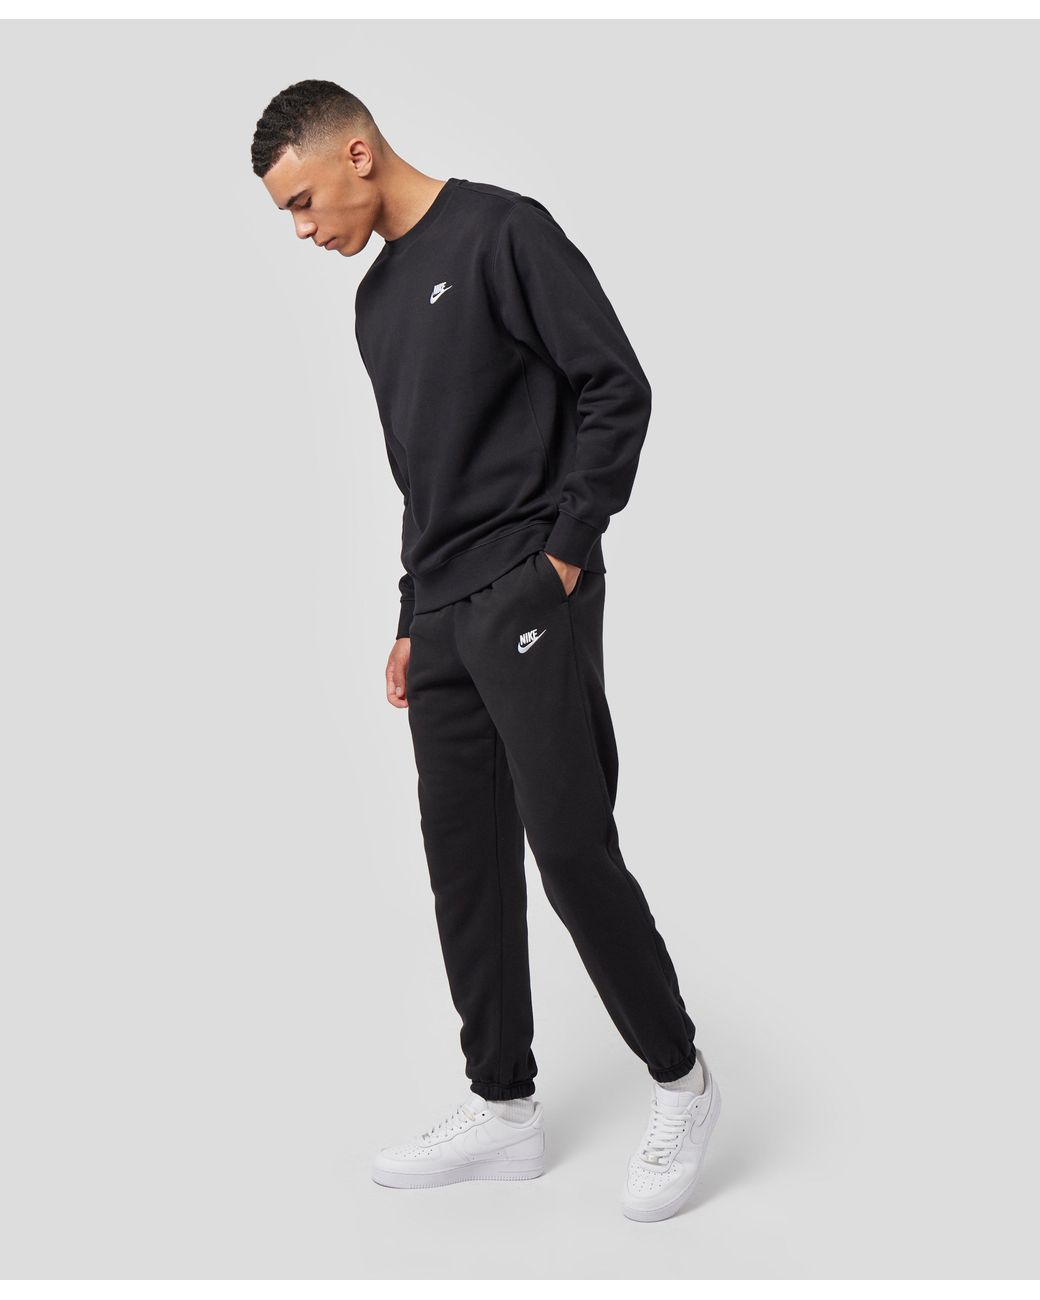 Nike Foundation Fleece Joggers in Black for Men - Save 80% - Lyst